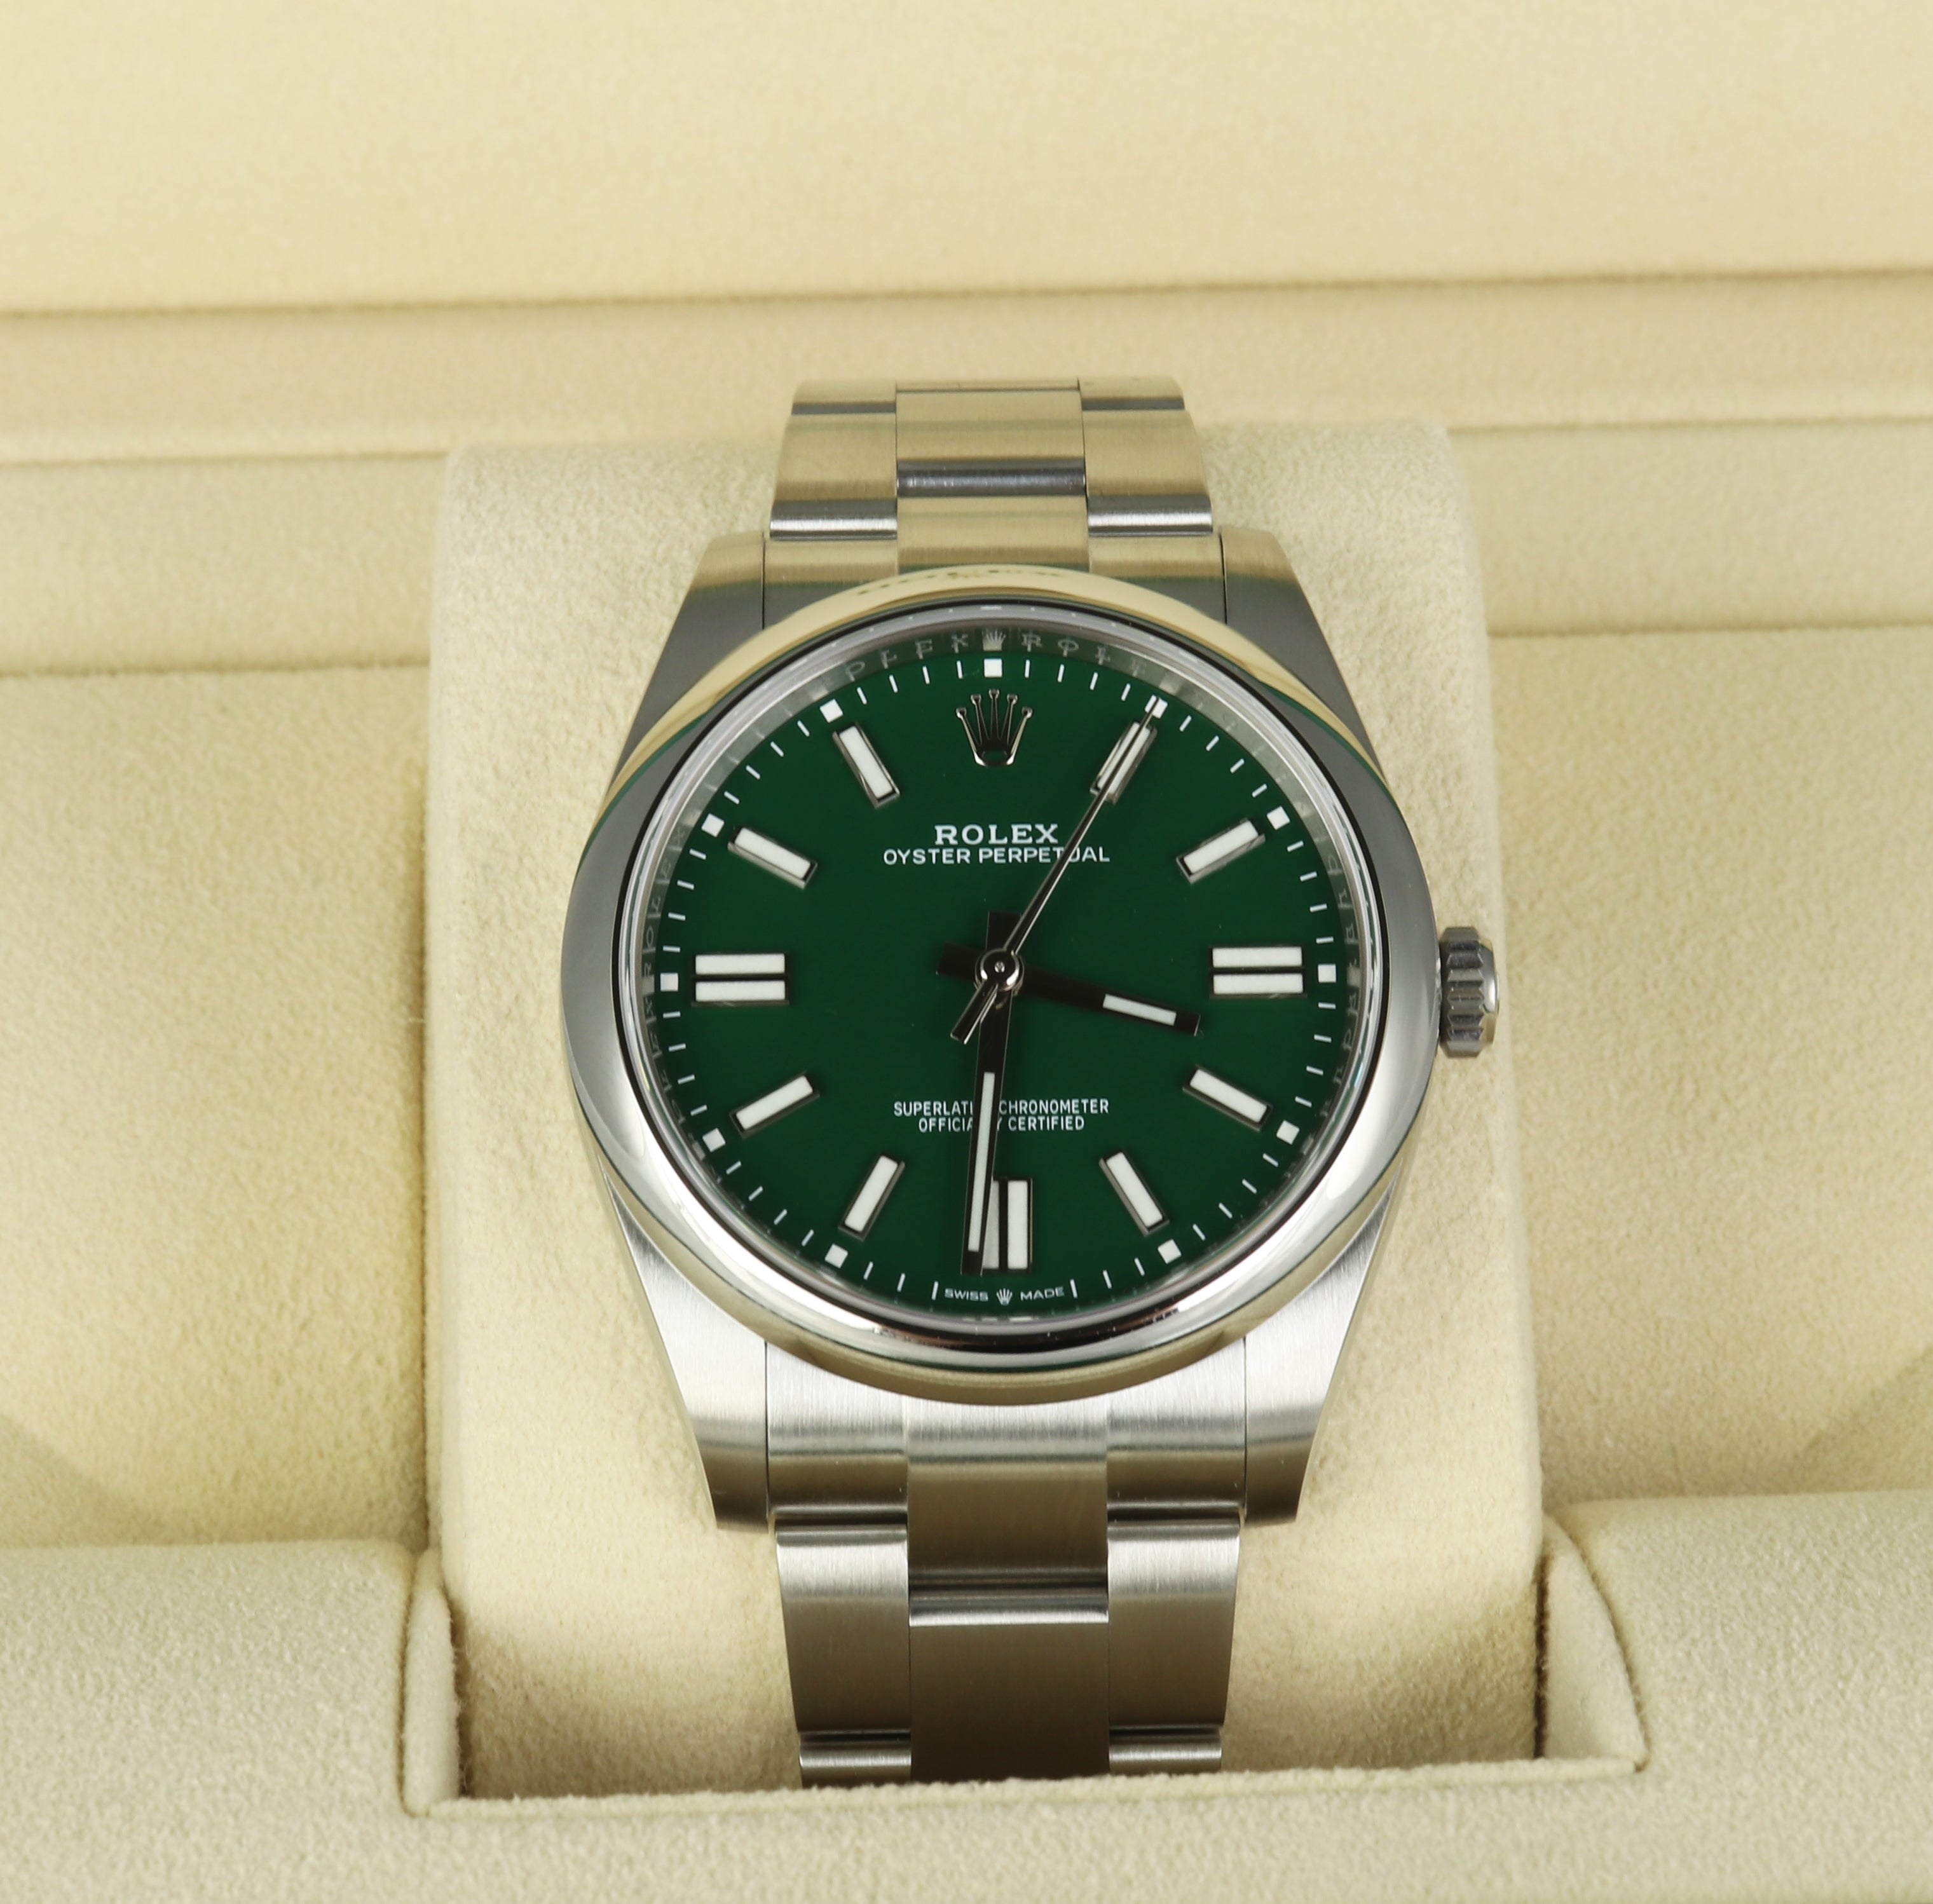 NEW DEC 2020 Rolex Oyster Perpetual 41 GREEN Watch 124300 41mm Stainless Steel